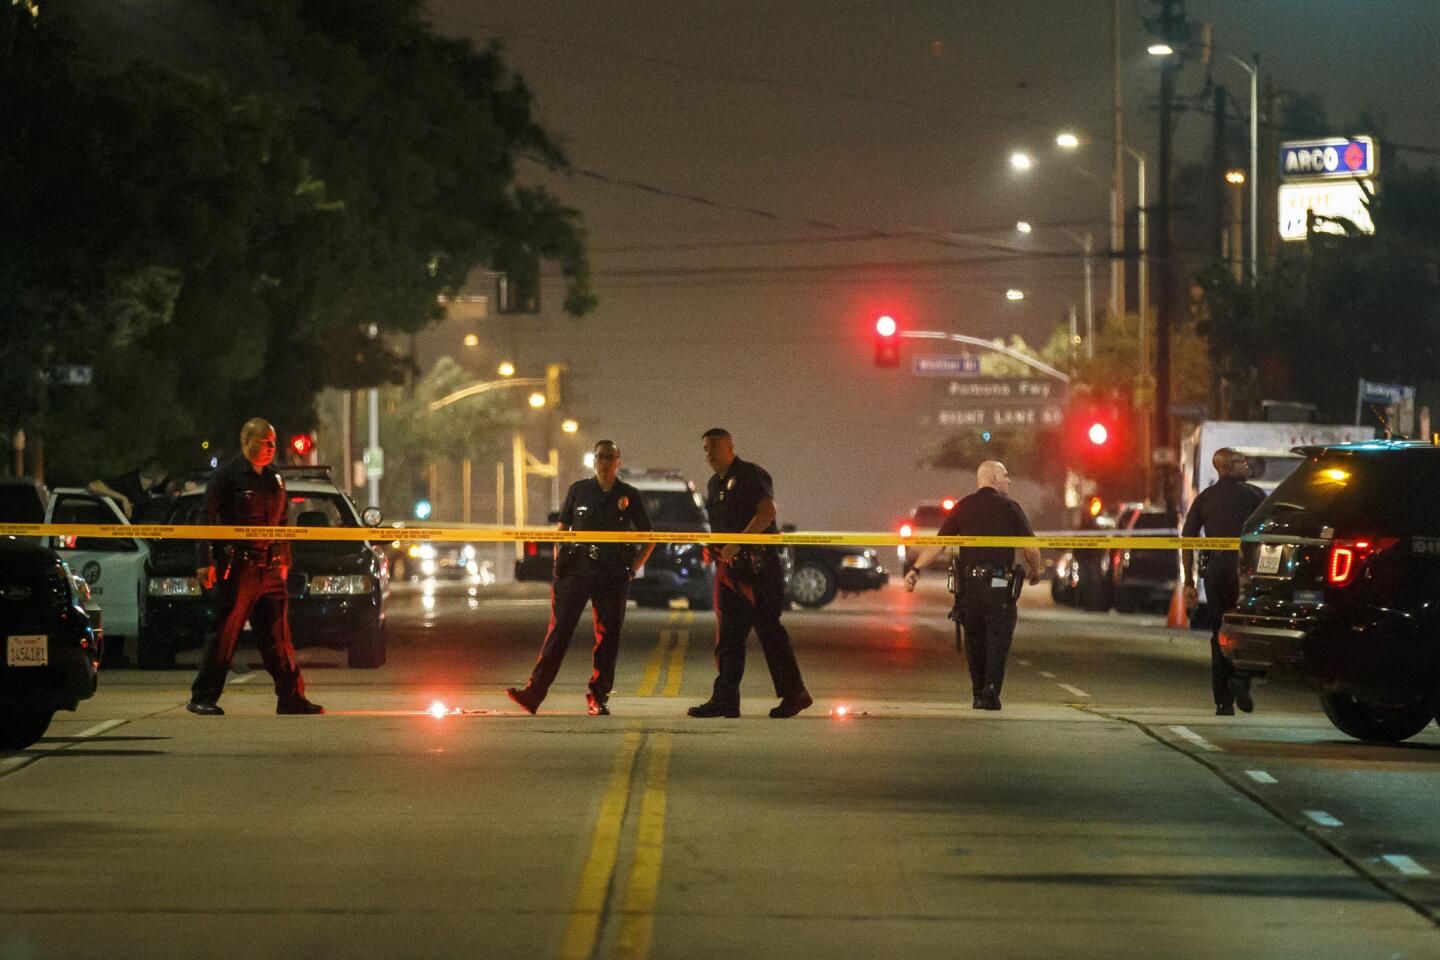 Police sealed off the shooting scene near East 7th and South Lorena streets in Boyle Heights.